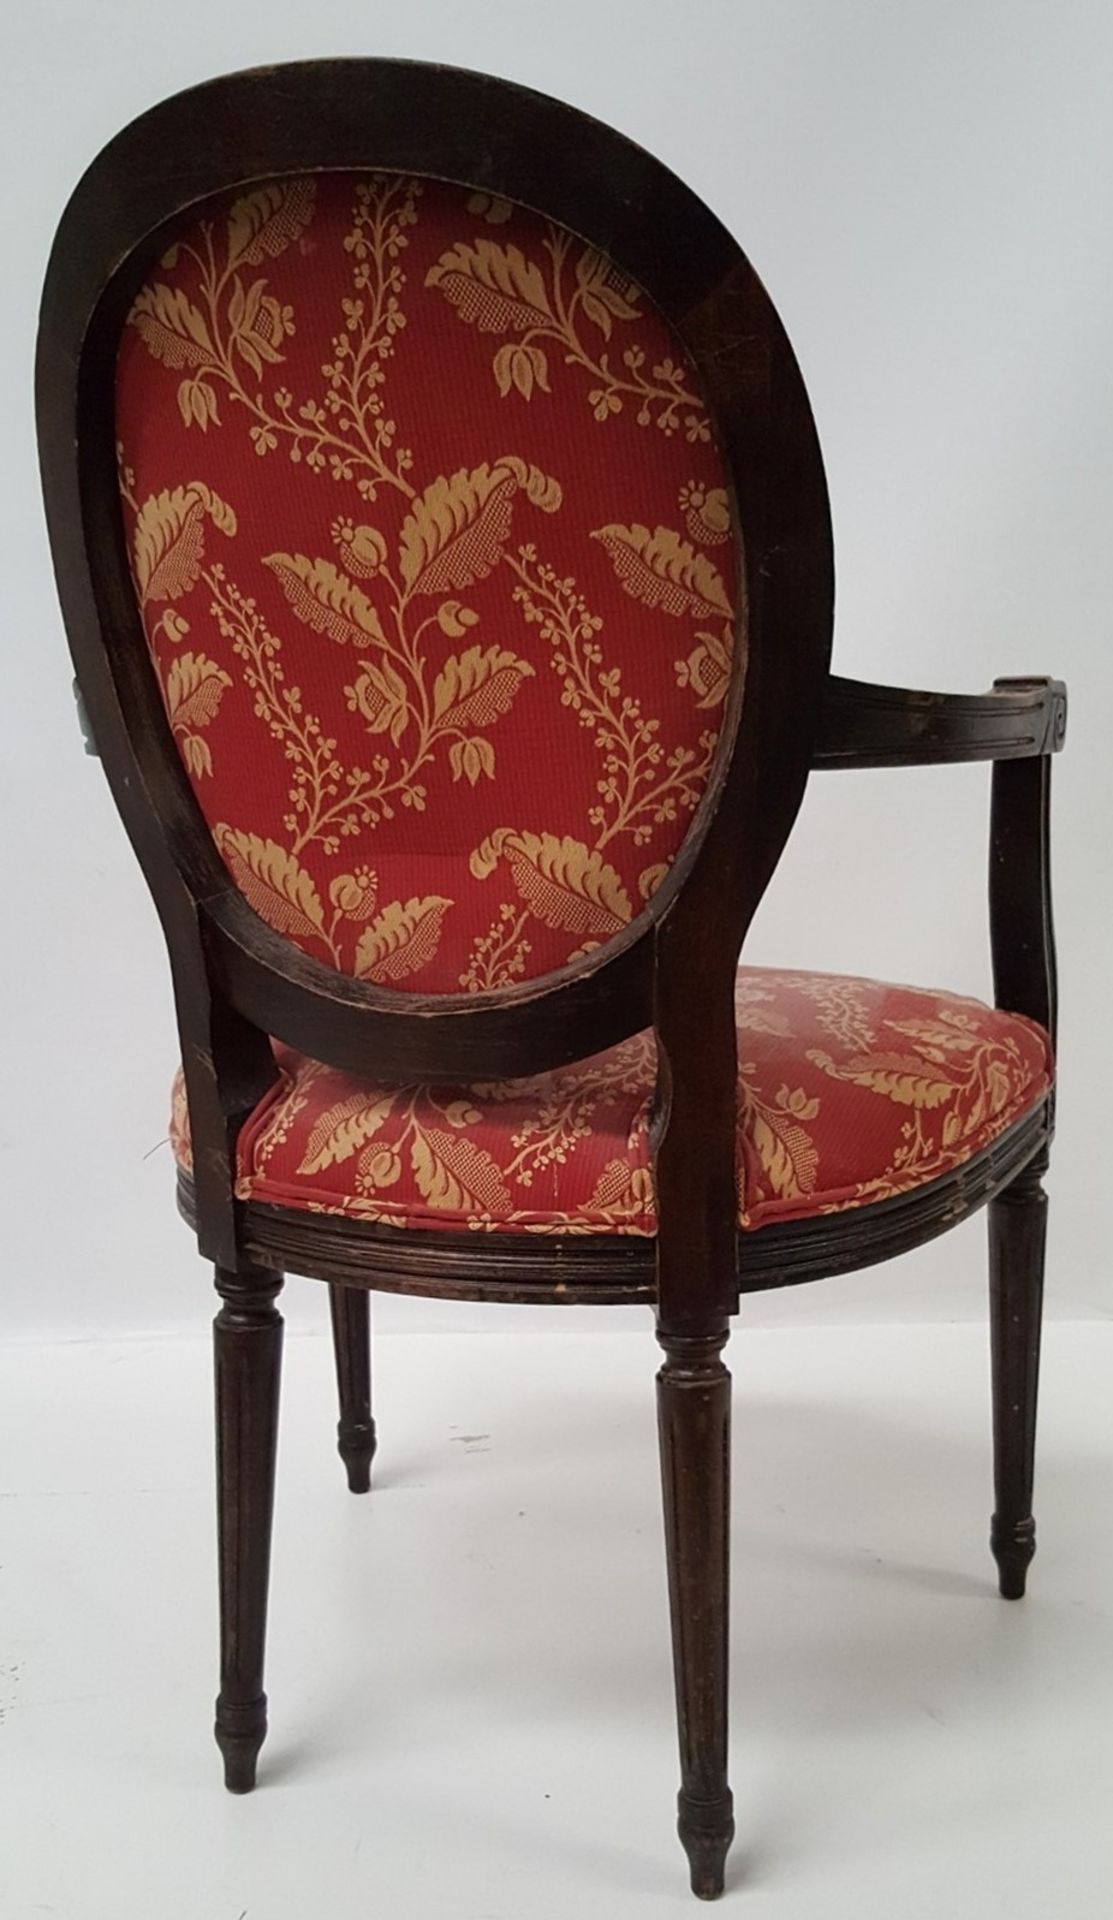 8 x Vintage Wooden Chairs Featuring Spindle Legs, And Upholstered In Red / Gold Floral Fabric - - Image 5 of 8